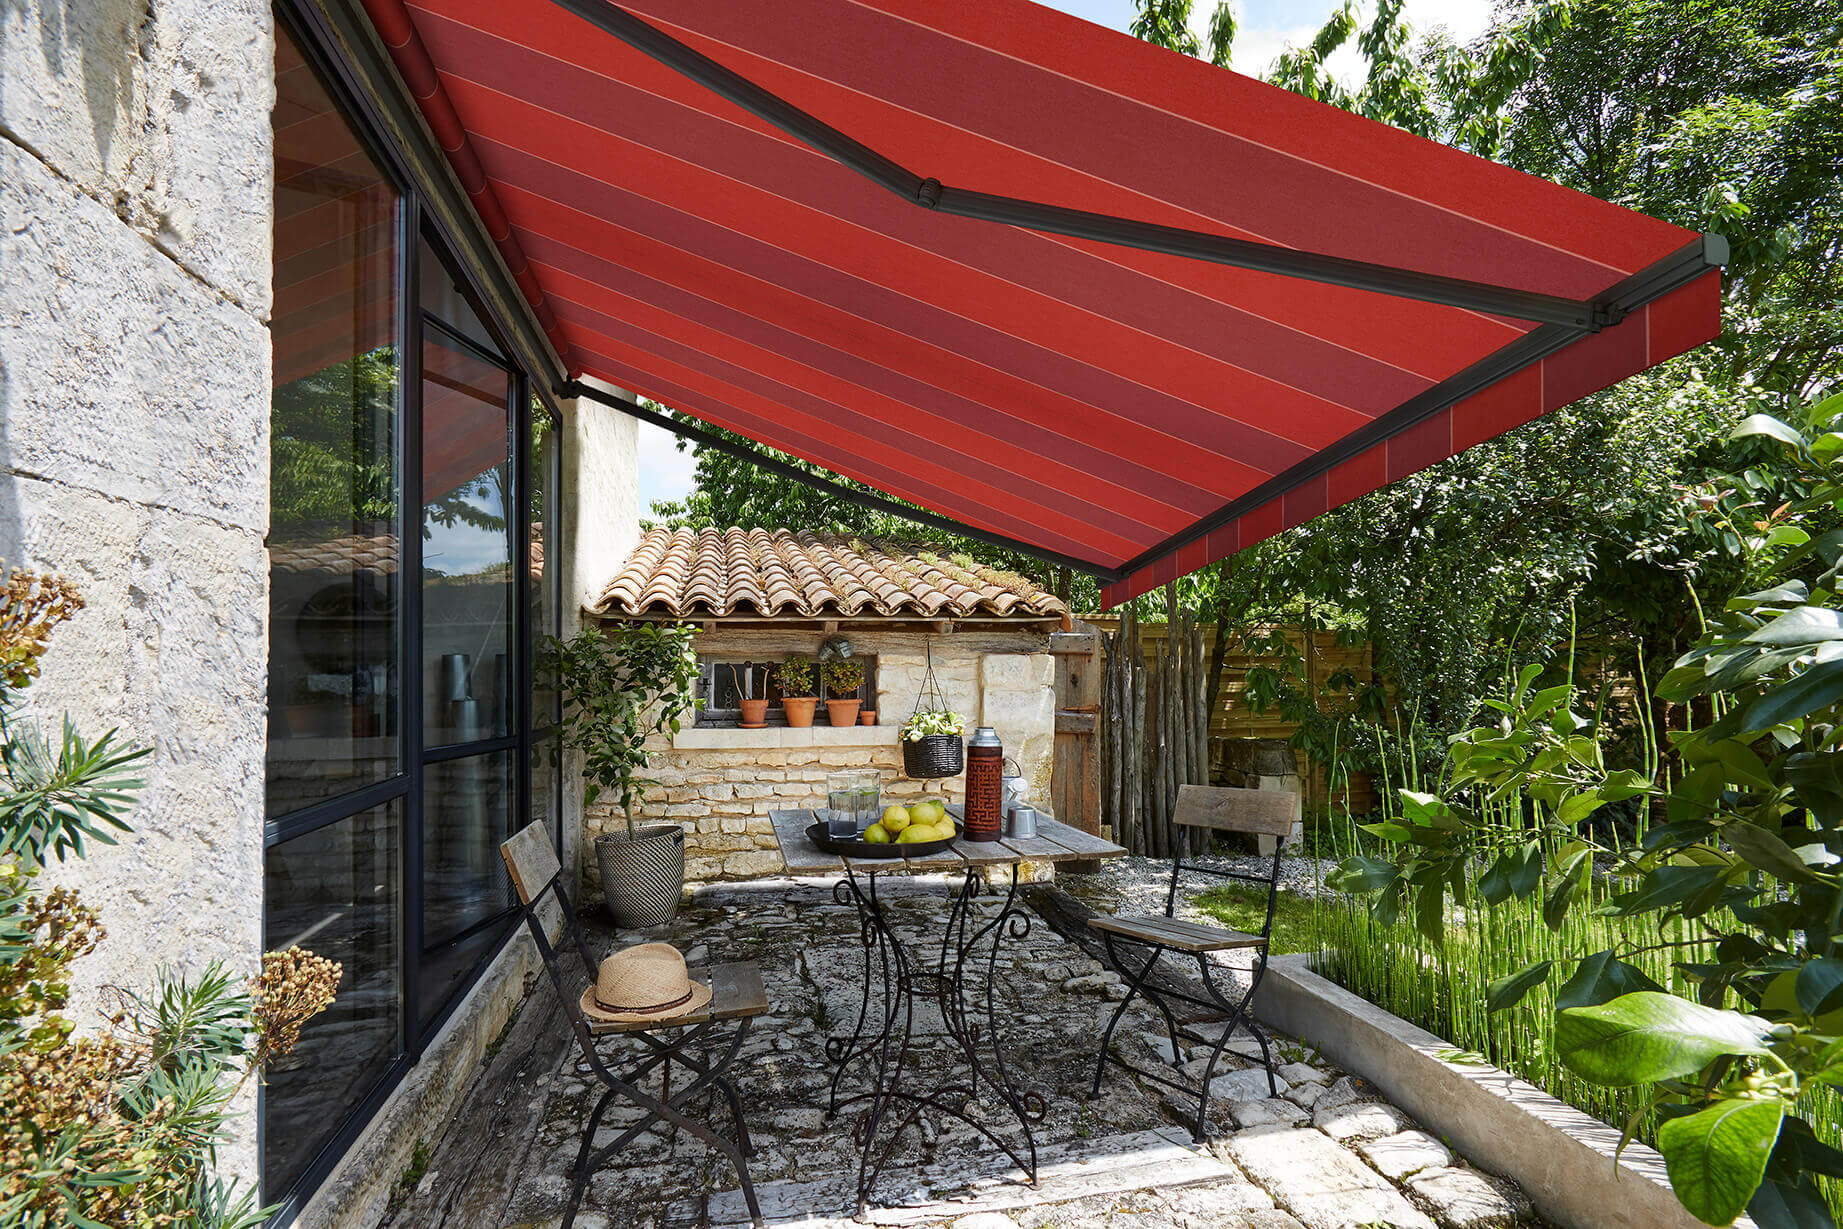 Red striped awning protecting wrought iron furniture